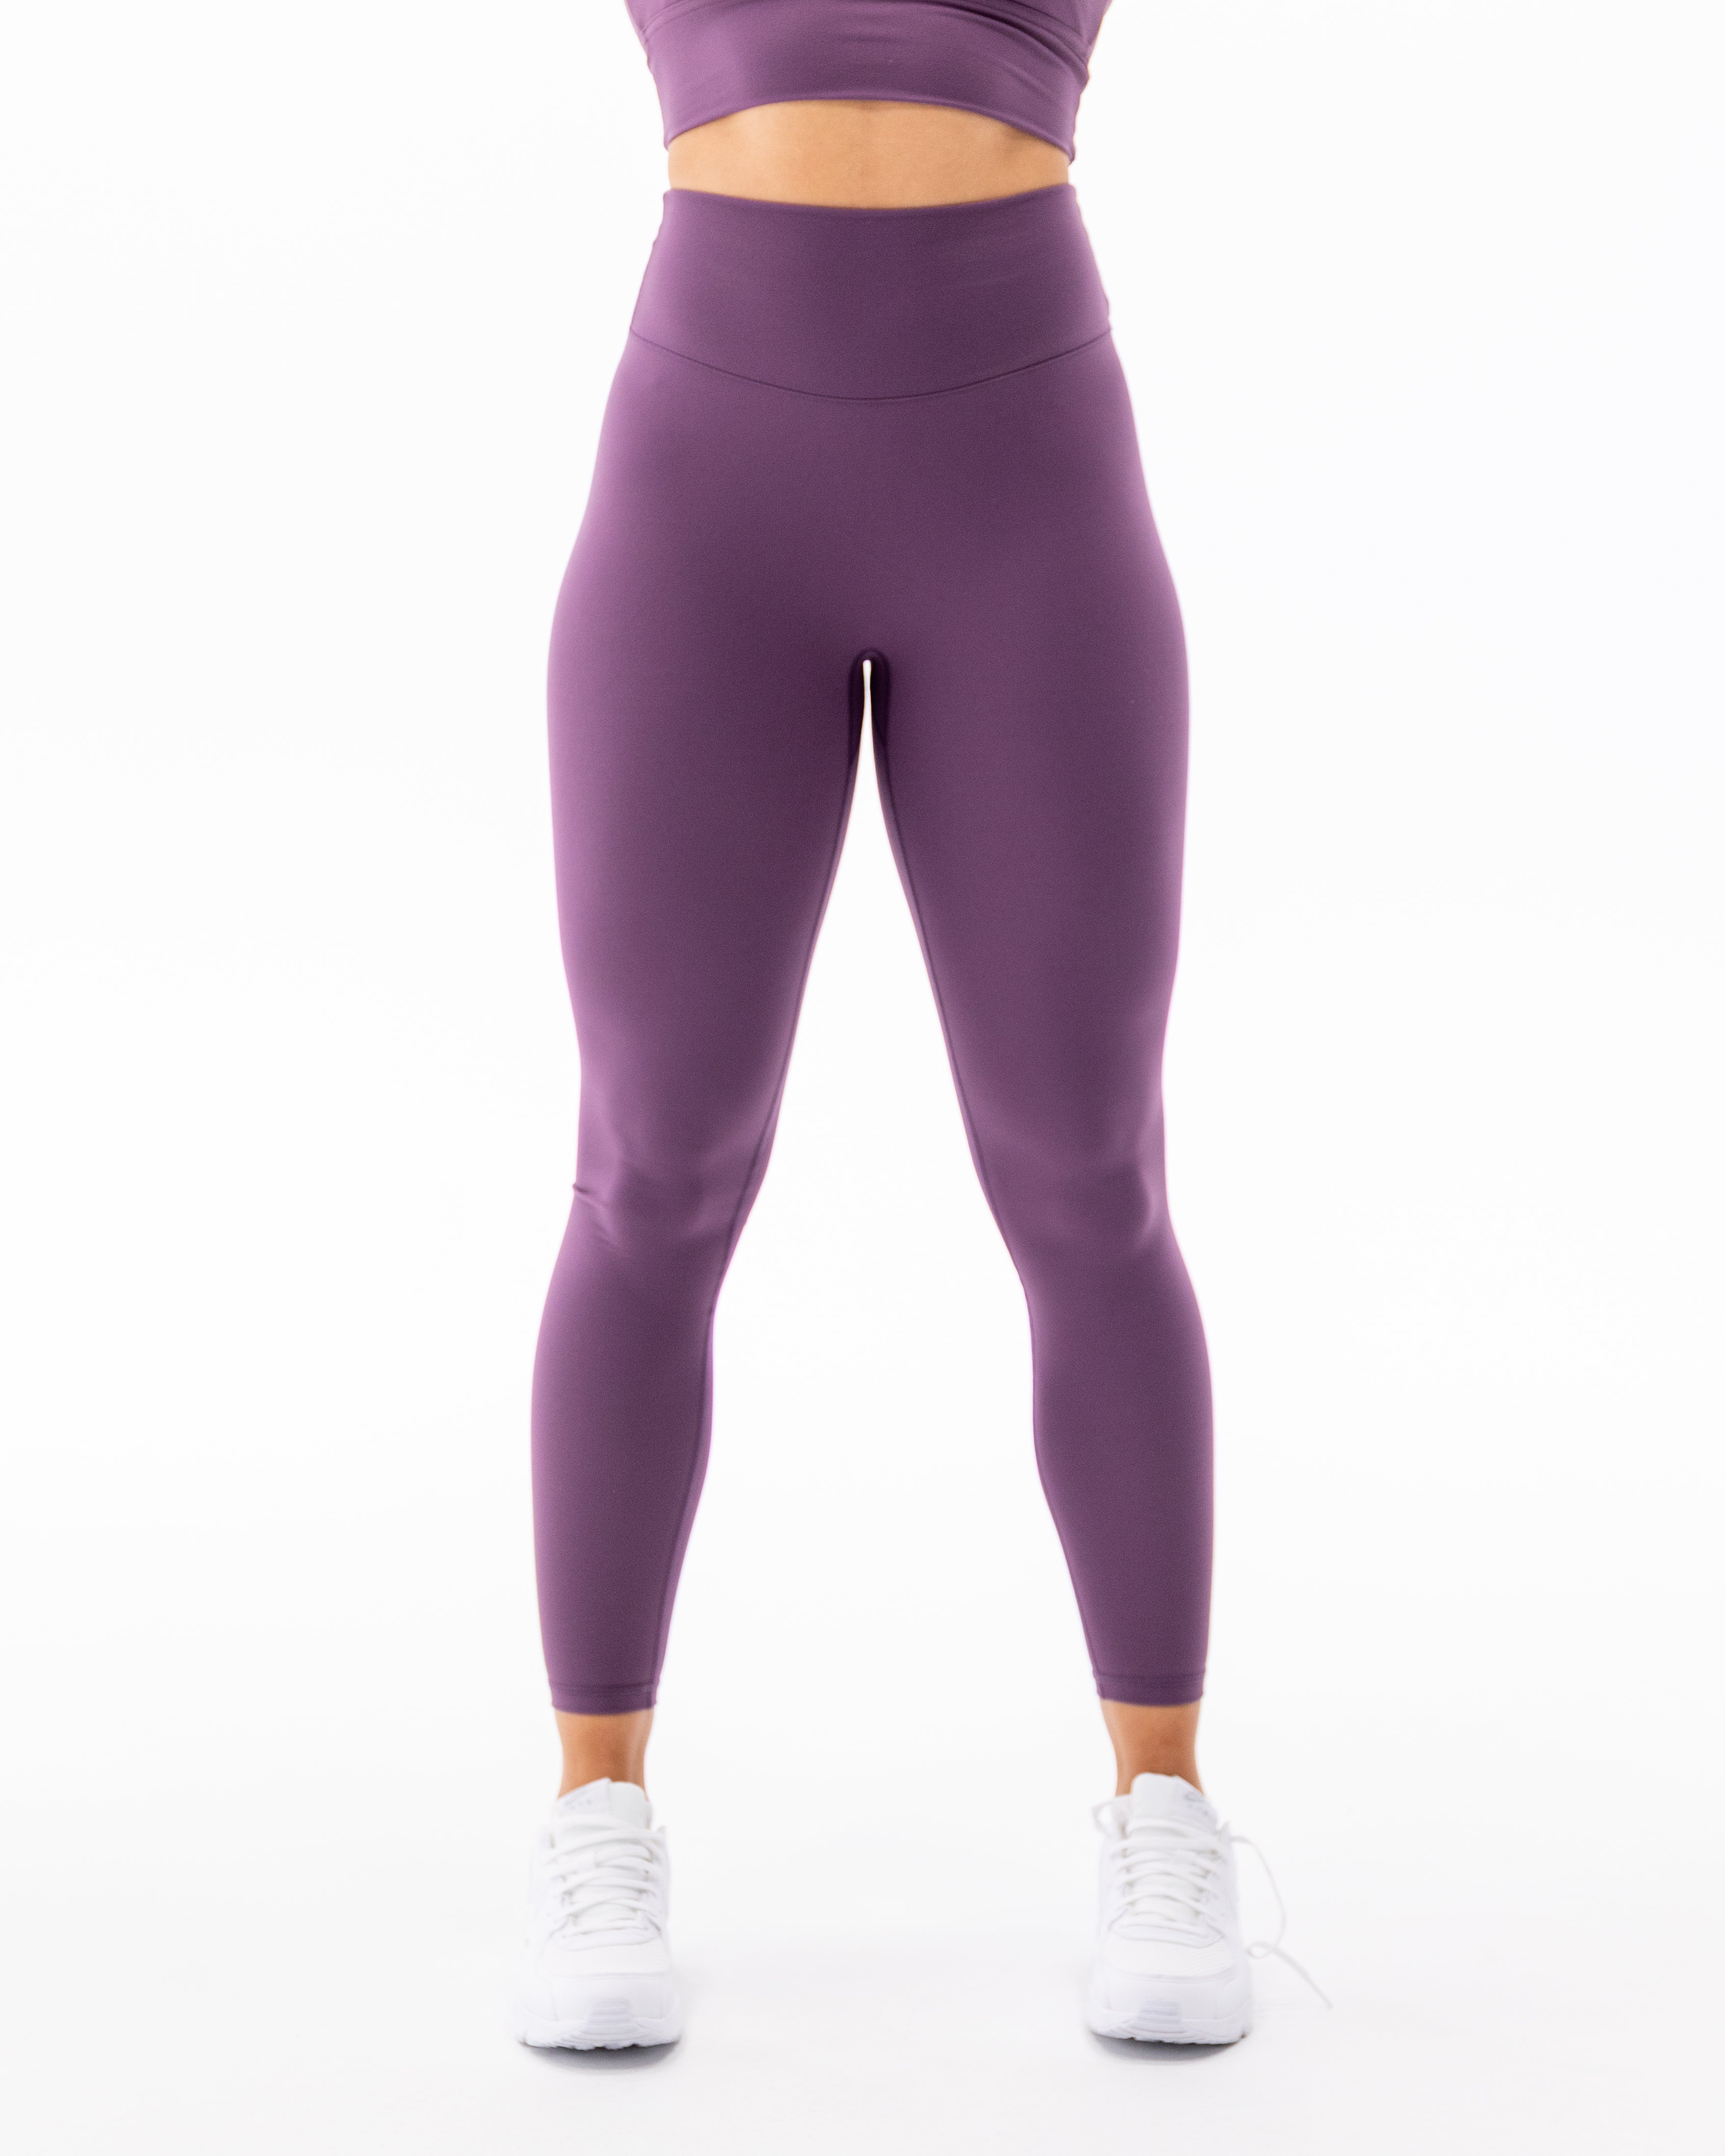 P'tula - Discover our new Alainah III Sleek Legging - now part of